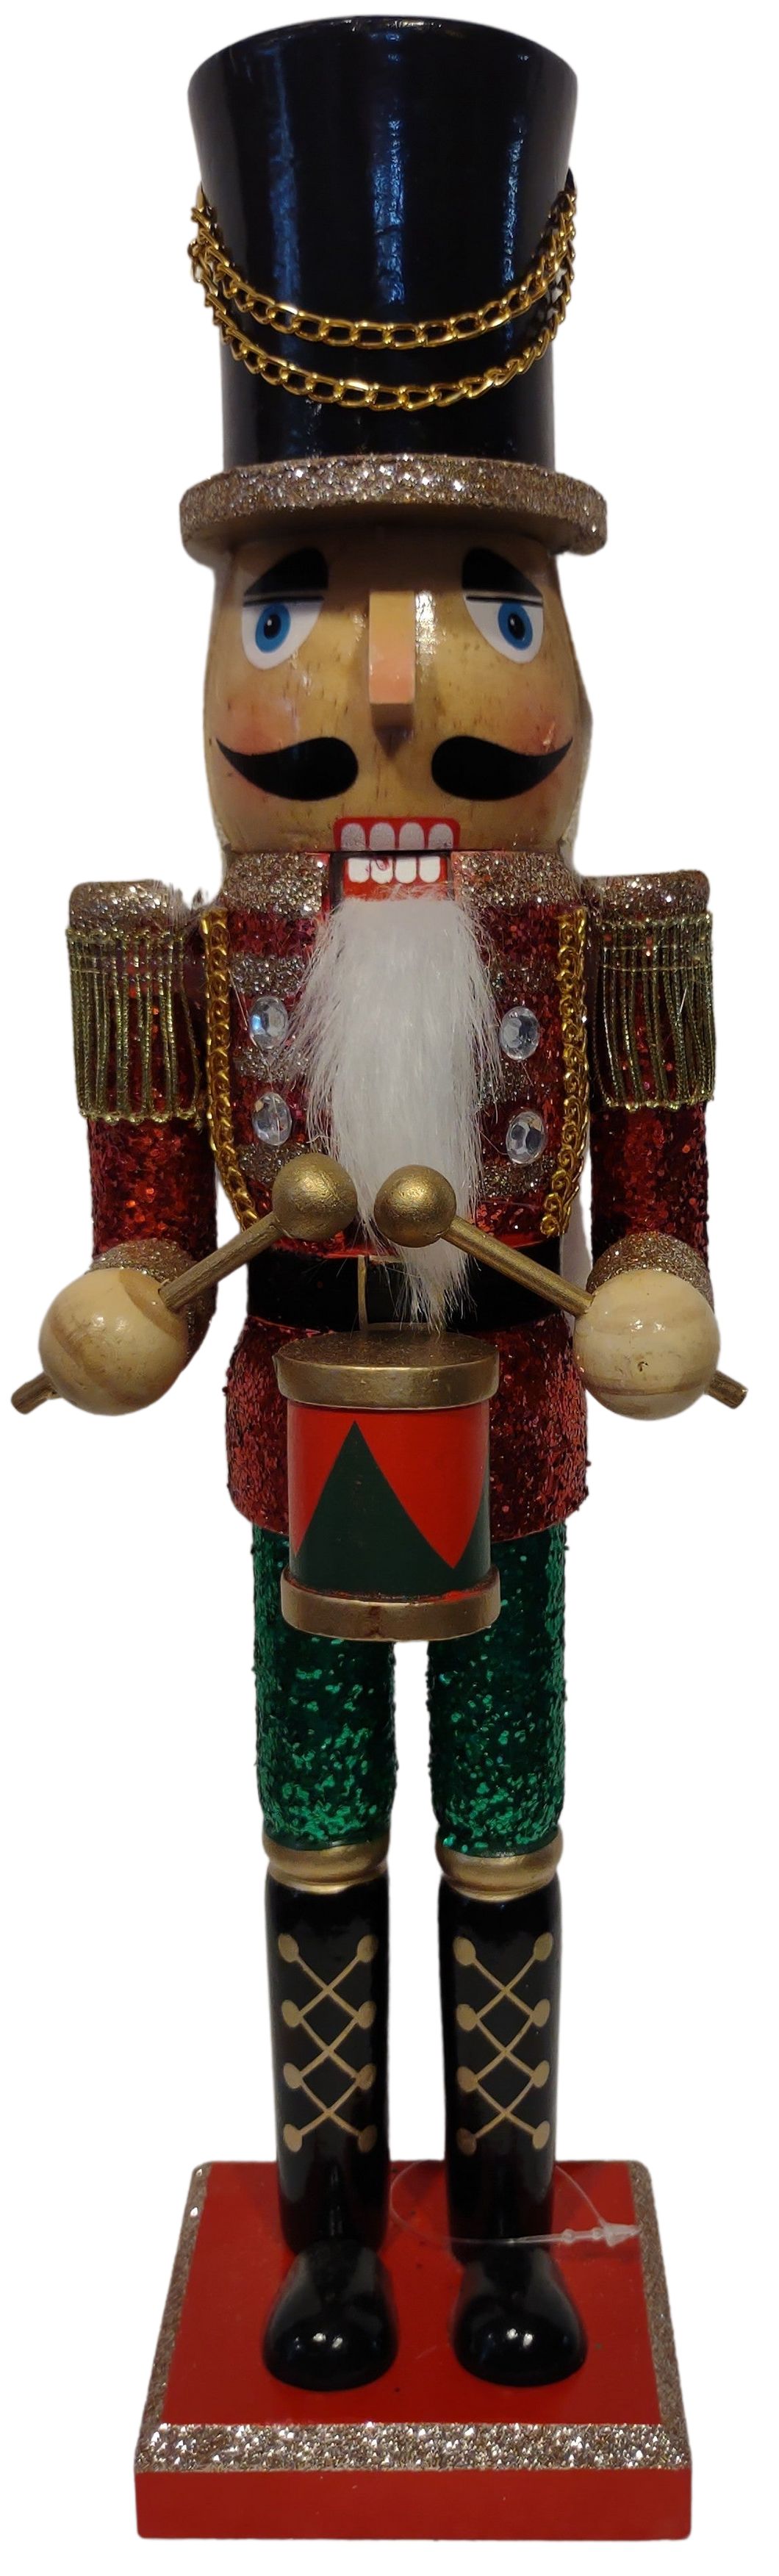 Wooden Royal Nutcracker Green/Gold/Red with Black Hat & Drum & Glitter 15